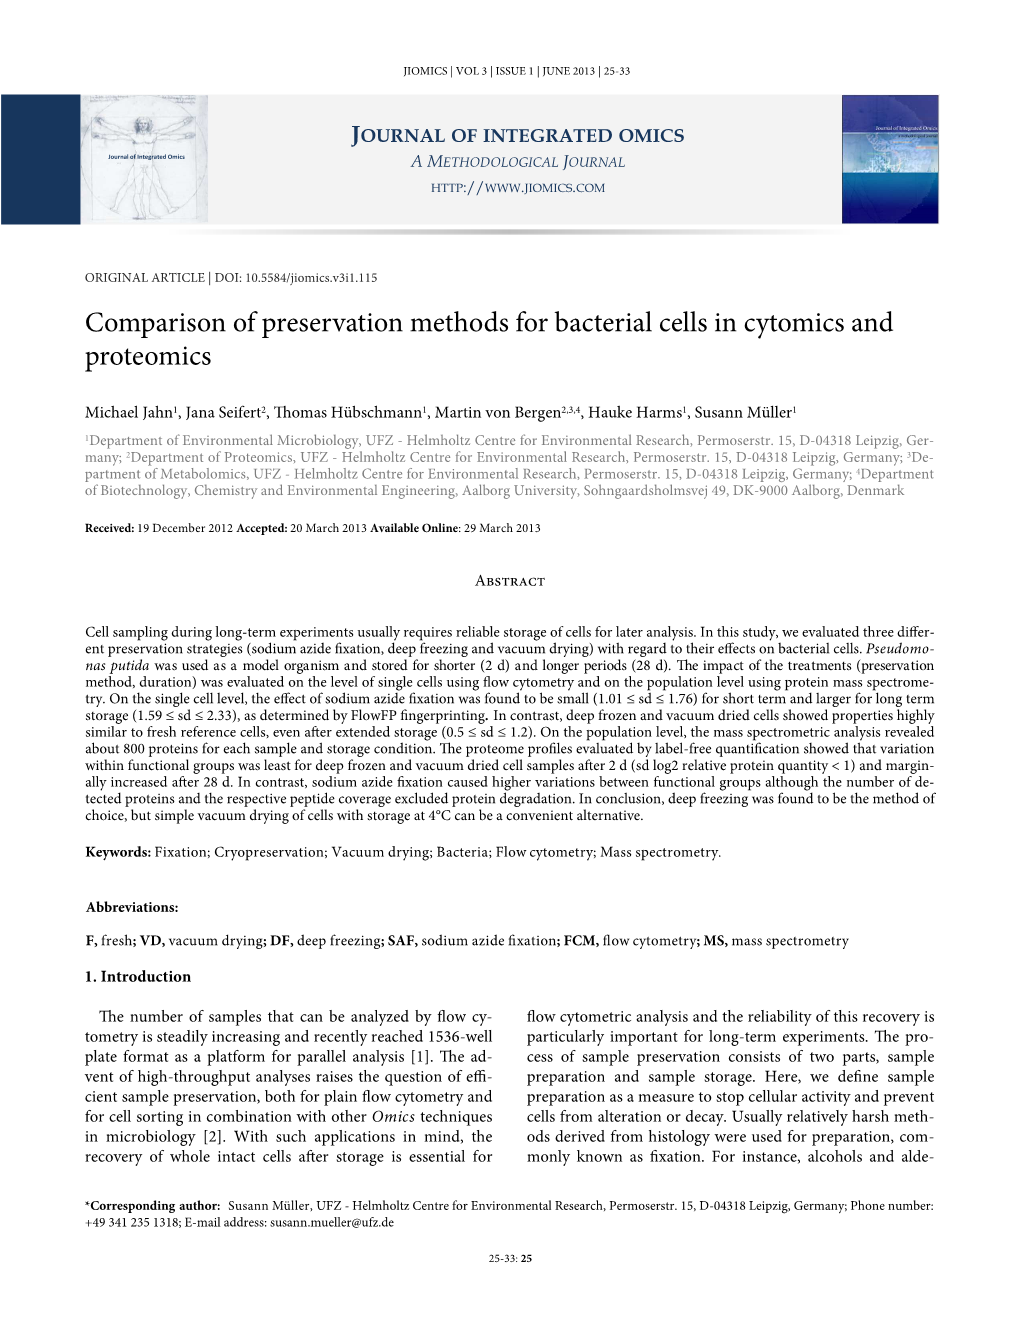 Comparison of Preservation Methods for Bacterial Cells in Cytomics and Proteomics